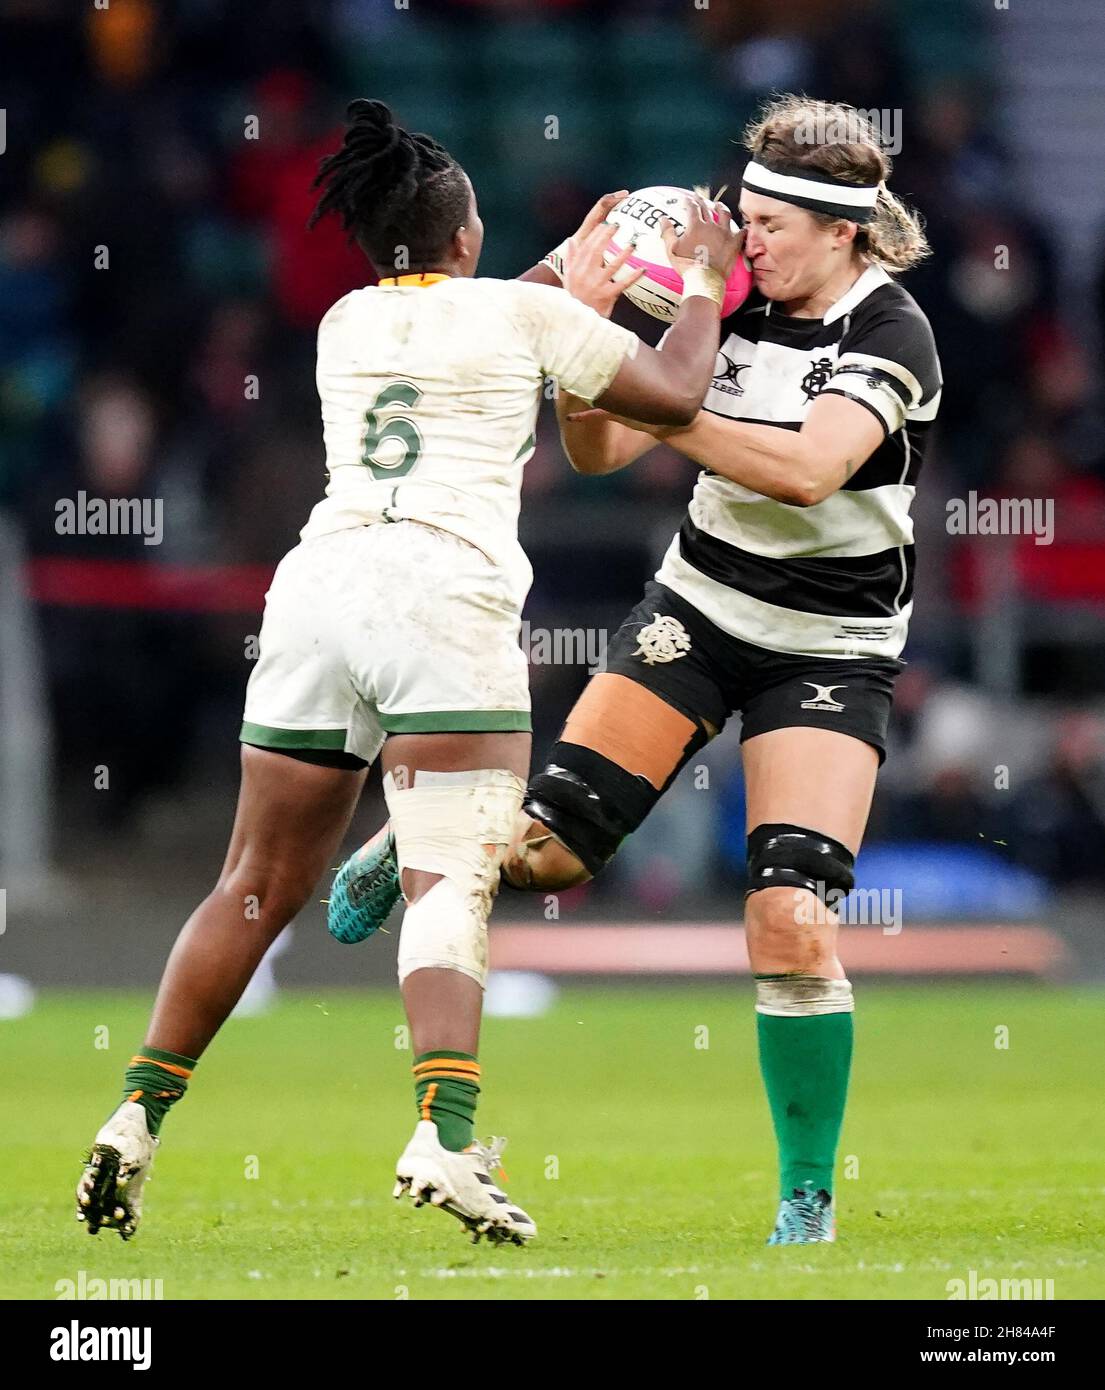 South Africa's Lusanda Dumke (left) and Barbarians' Anna Caplice in action during the Autumn International match at Twickenham Stadium, London. Picture date: Saturday November 27, 2021. See PA story RUGBYU Barbarian Women. Photo credit should read: David Davies/PA Wire. RESTRICTIONS: Use subject to restrictions. Editorial use only, no commercial use without prior consent from rights holder. Stock Photo